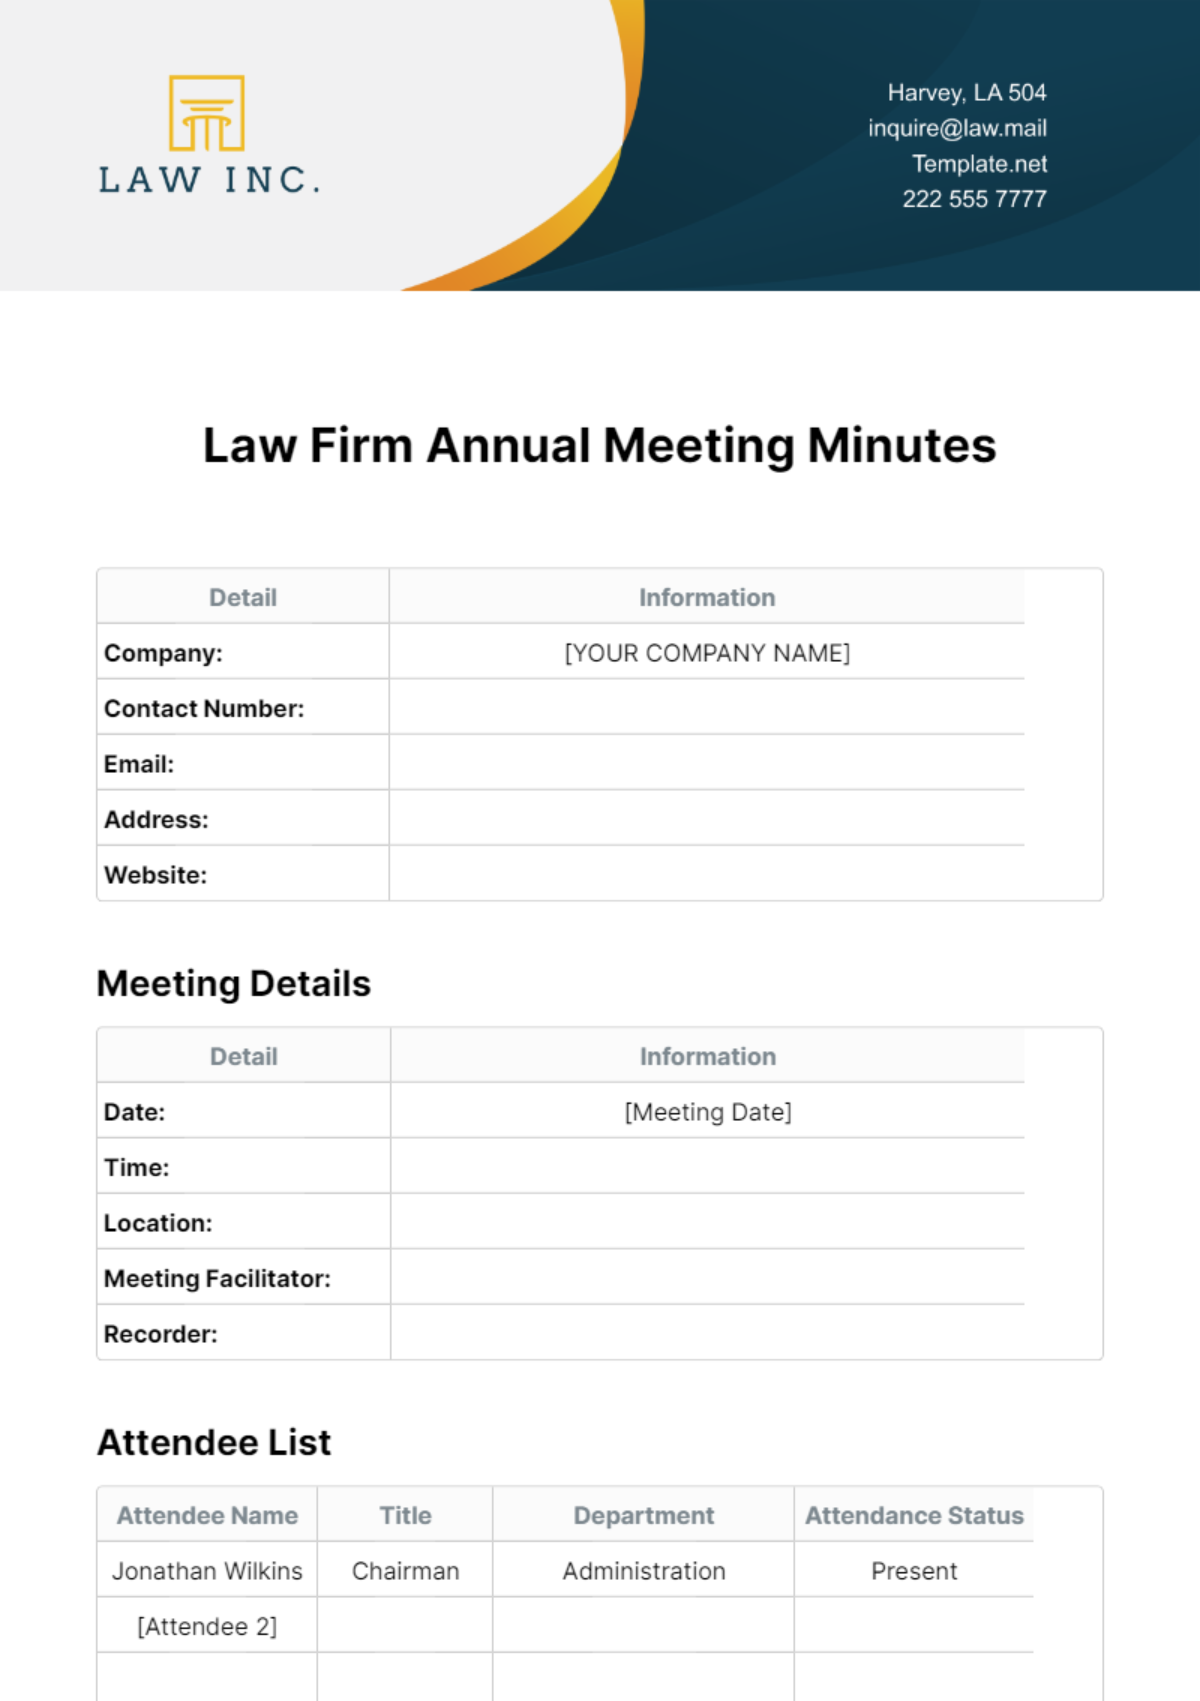 Free Law Firm Annual Meeting Minutes Template